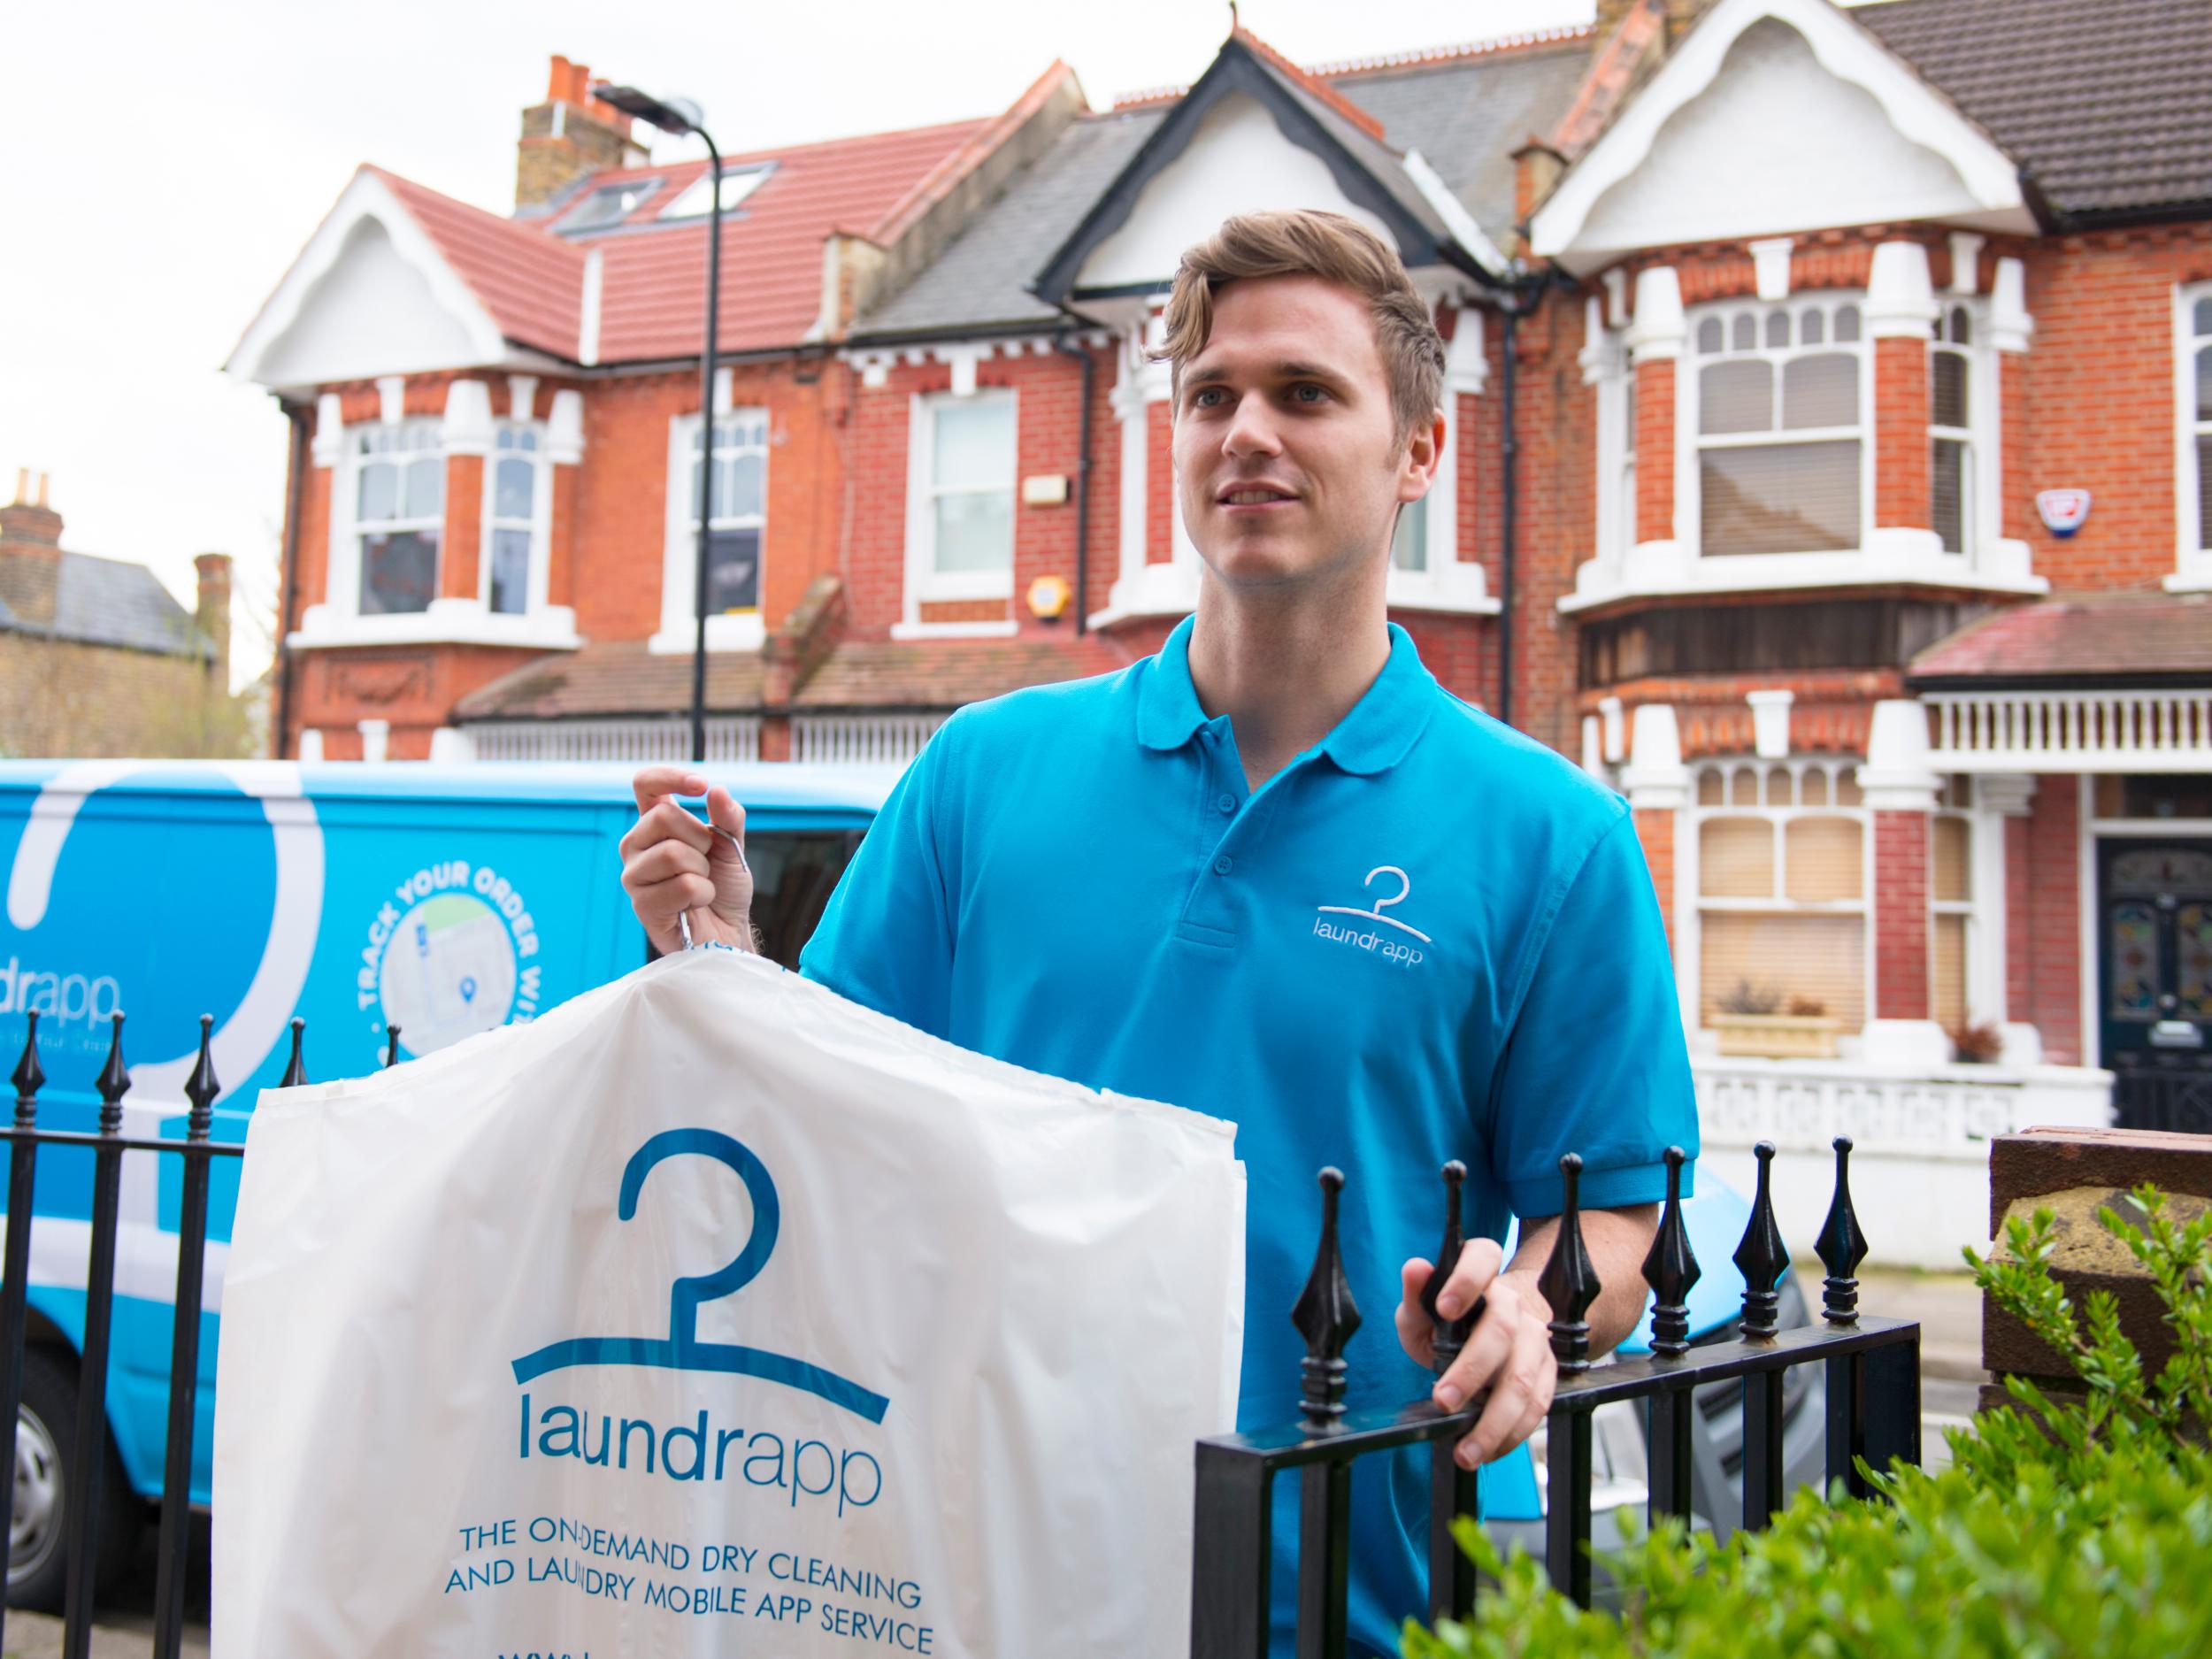 Unlike Uber and Deliveroo, Laundrapp employs its own drivers